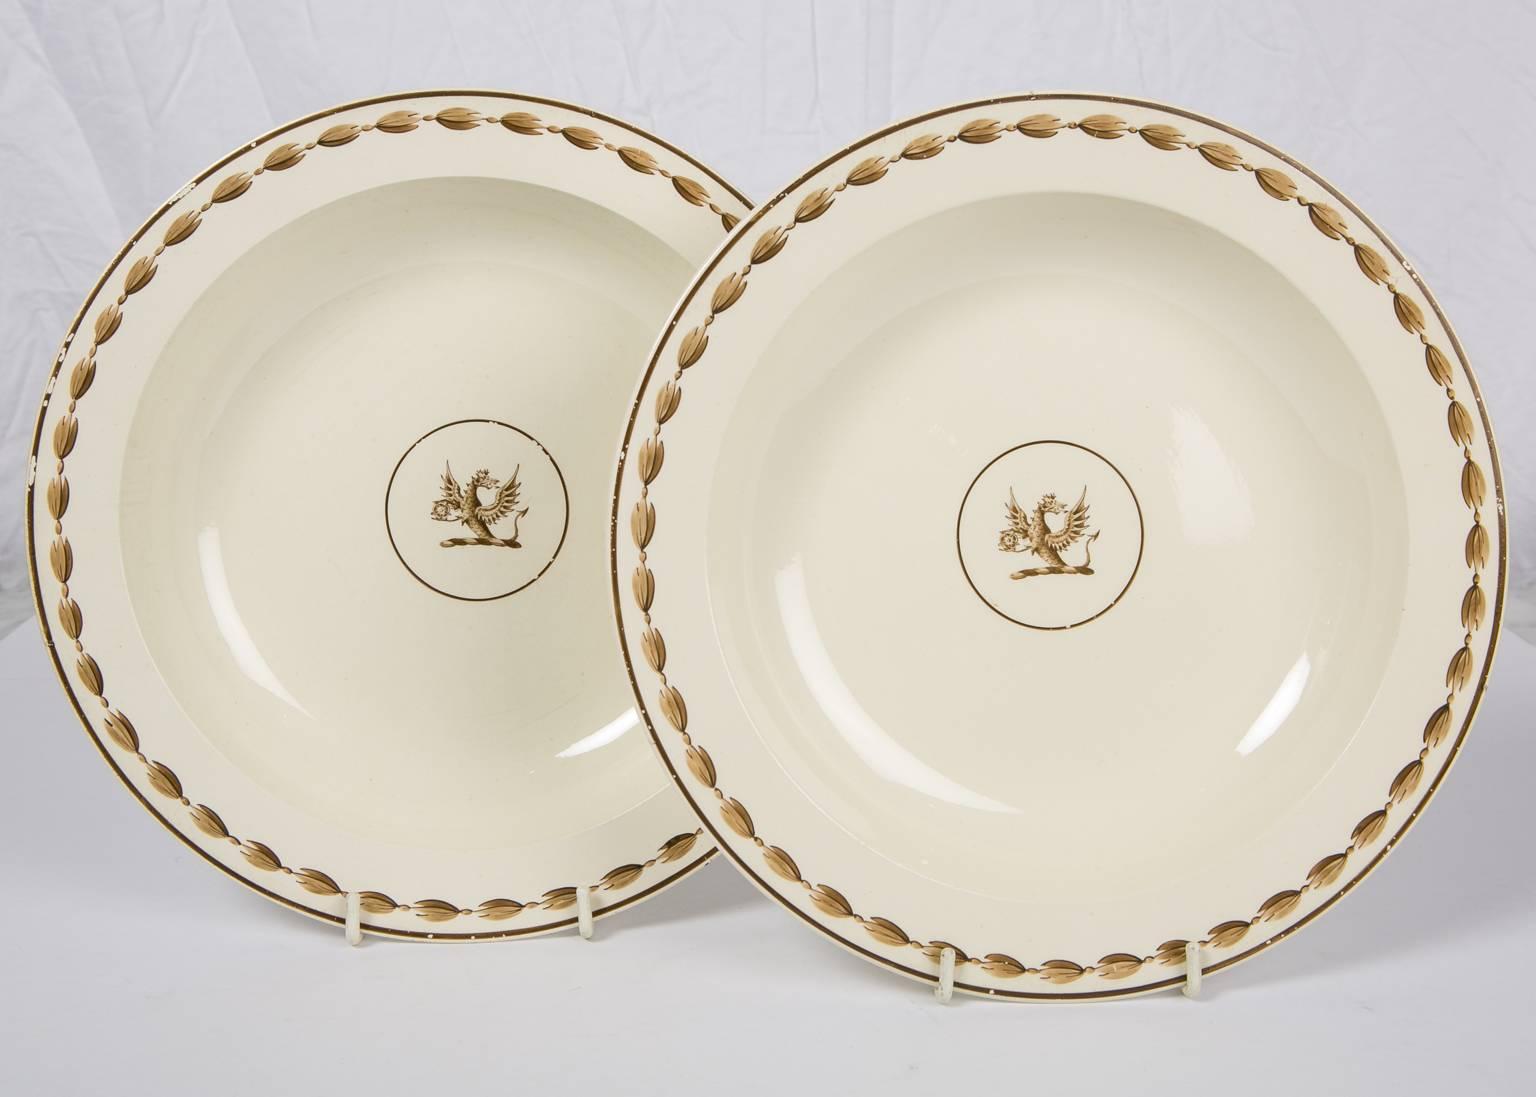 A pair of late 18th century Wedgwood deep dishes painted in shades of brown. The center of each dish has a crest showing a dragon with wings lifted holding a Tudor Rose. The Tudor Rose which Henry VII adopted at the time of his marriage conjoins the